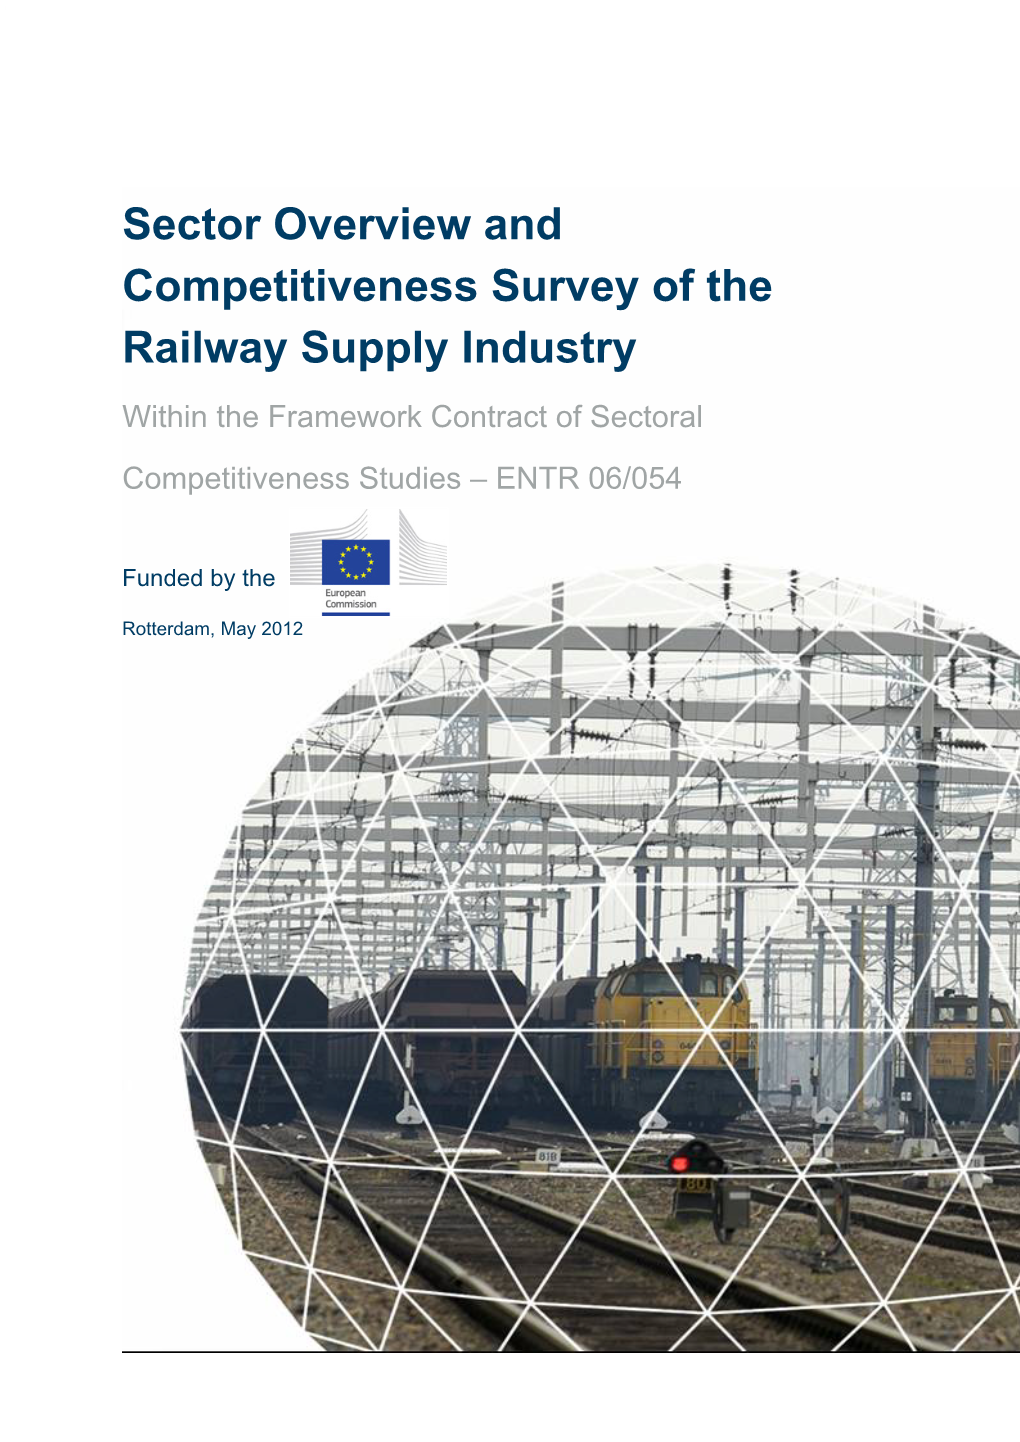 Study- Sector Overview and Competitiveness Survey of the Railway Supply Industry